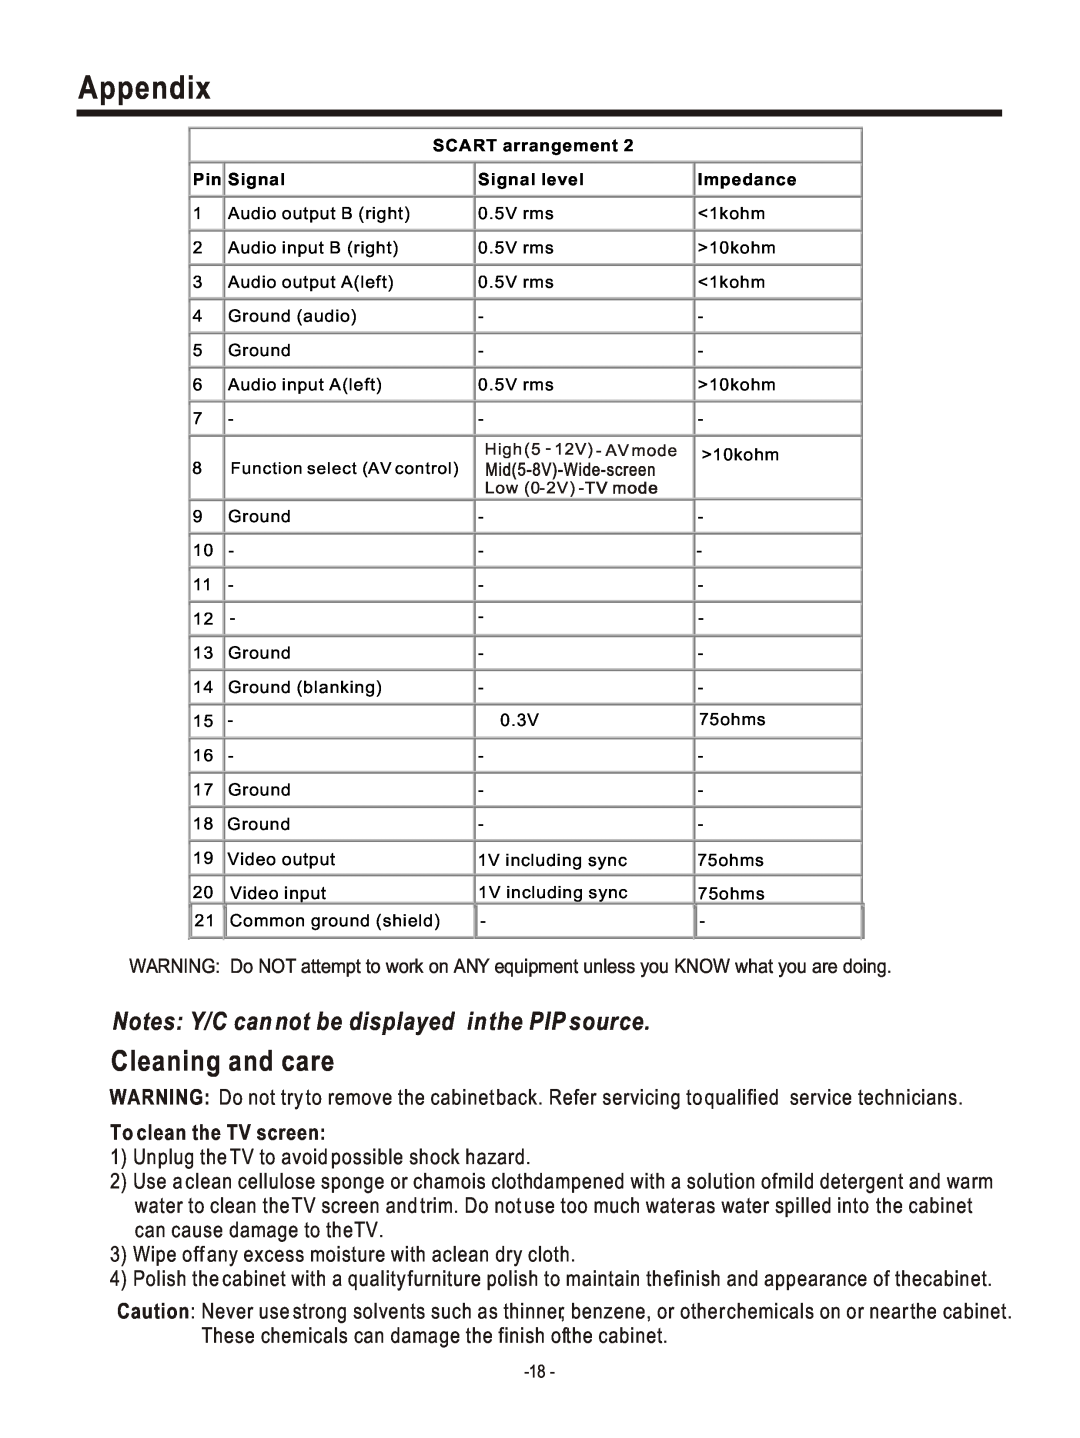 Hisense Group PDP4220EU user manual Cleaning and care, Appendix, Notes Y/C can not be displayed in the PIP source 